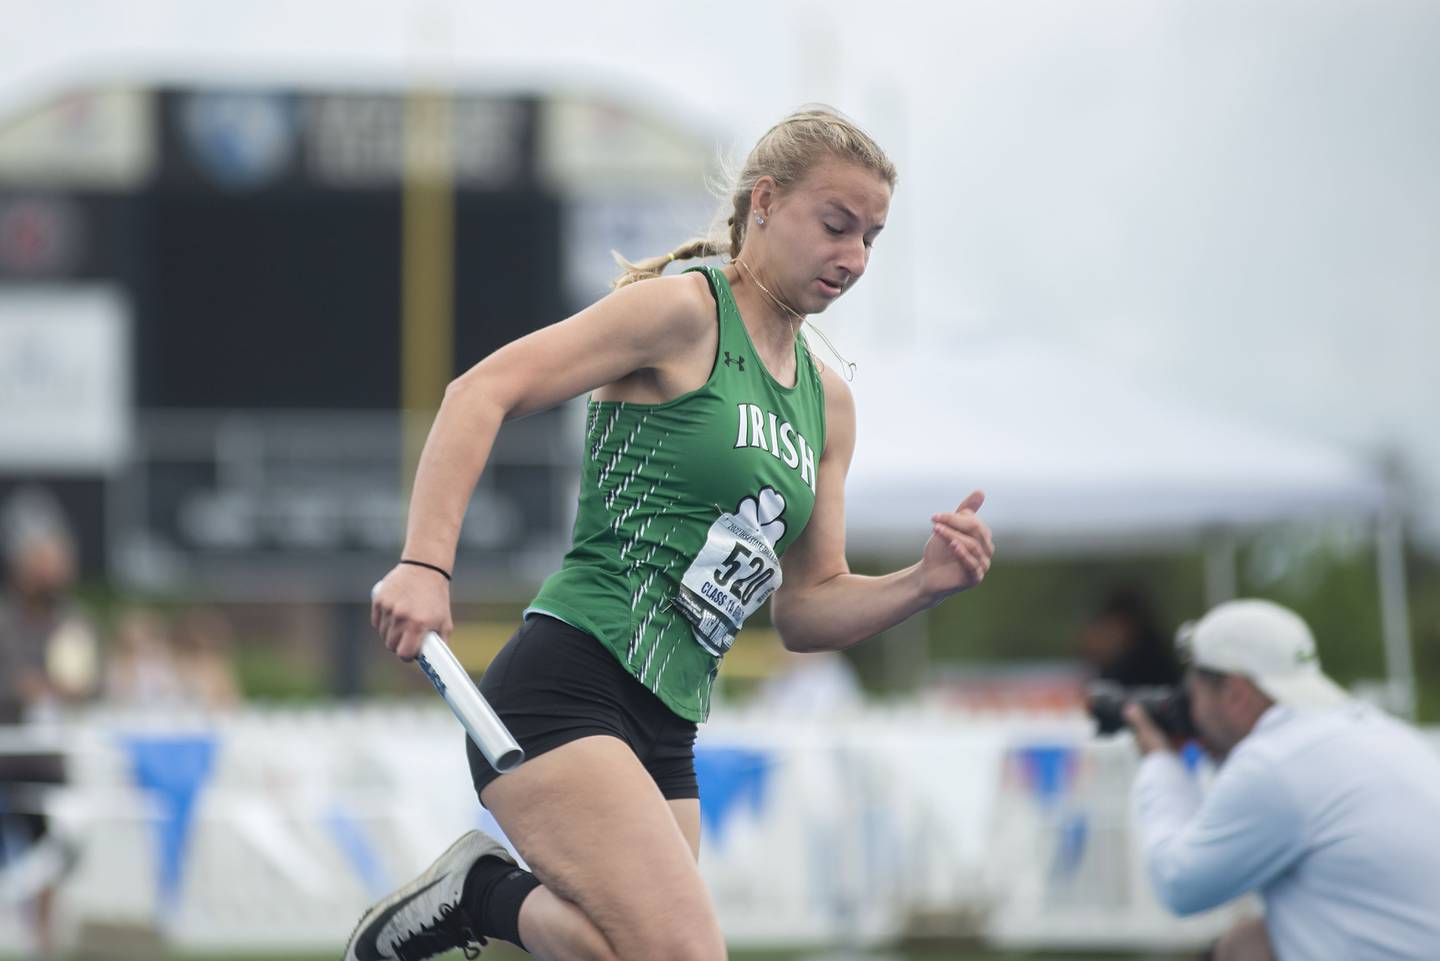 Seneca's Caitlyn O'Boyle competes in the 4x1 finals during the IHSA girls state championships, Saturday, May 21, 2022 in Charleston.